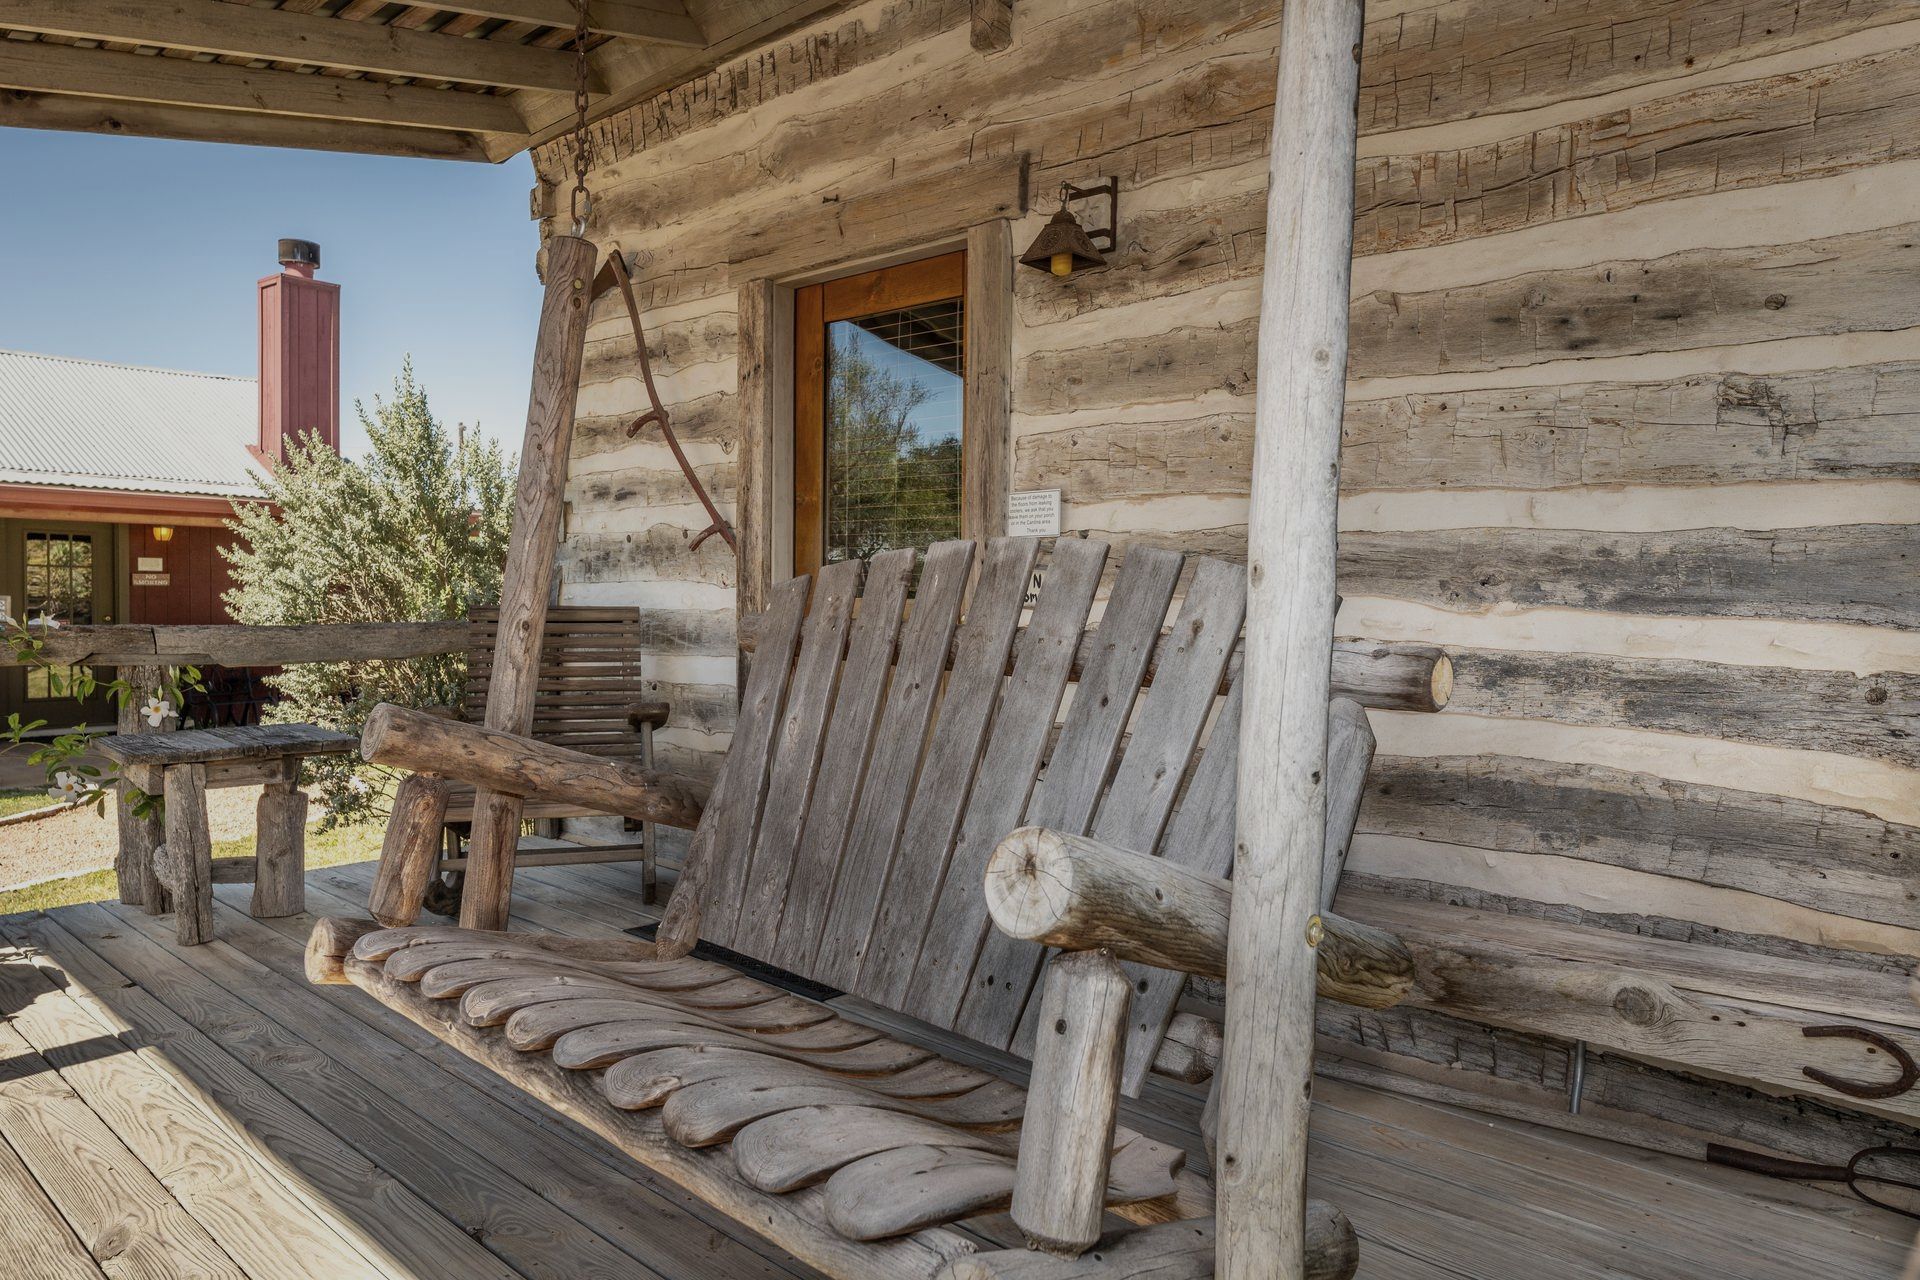 A wooden porch swing is on the porch of a log cabin.